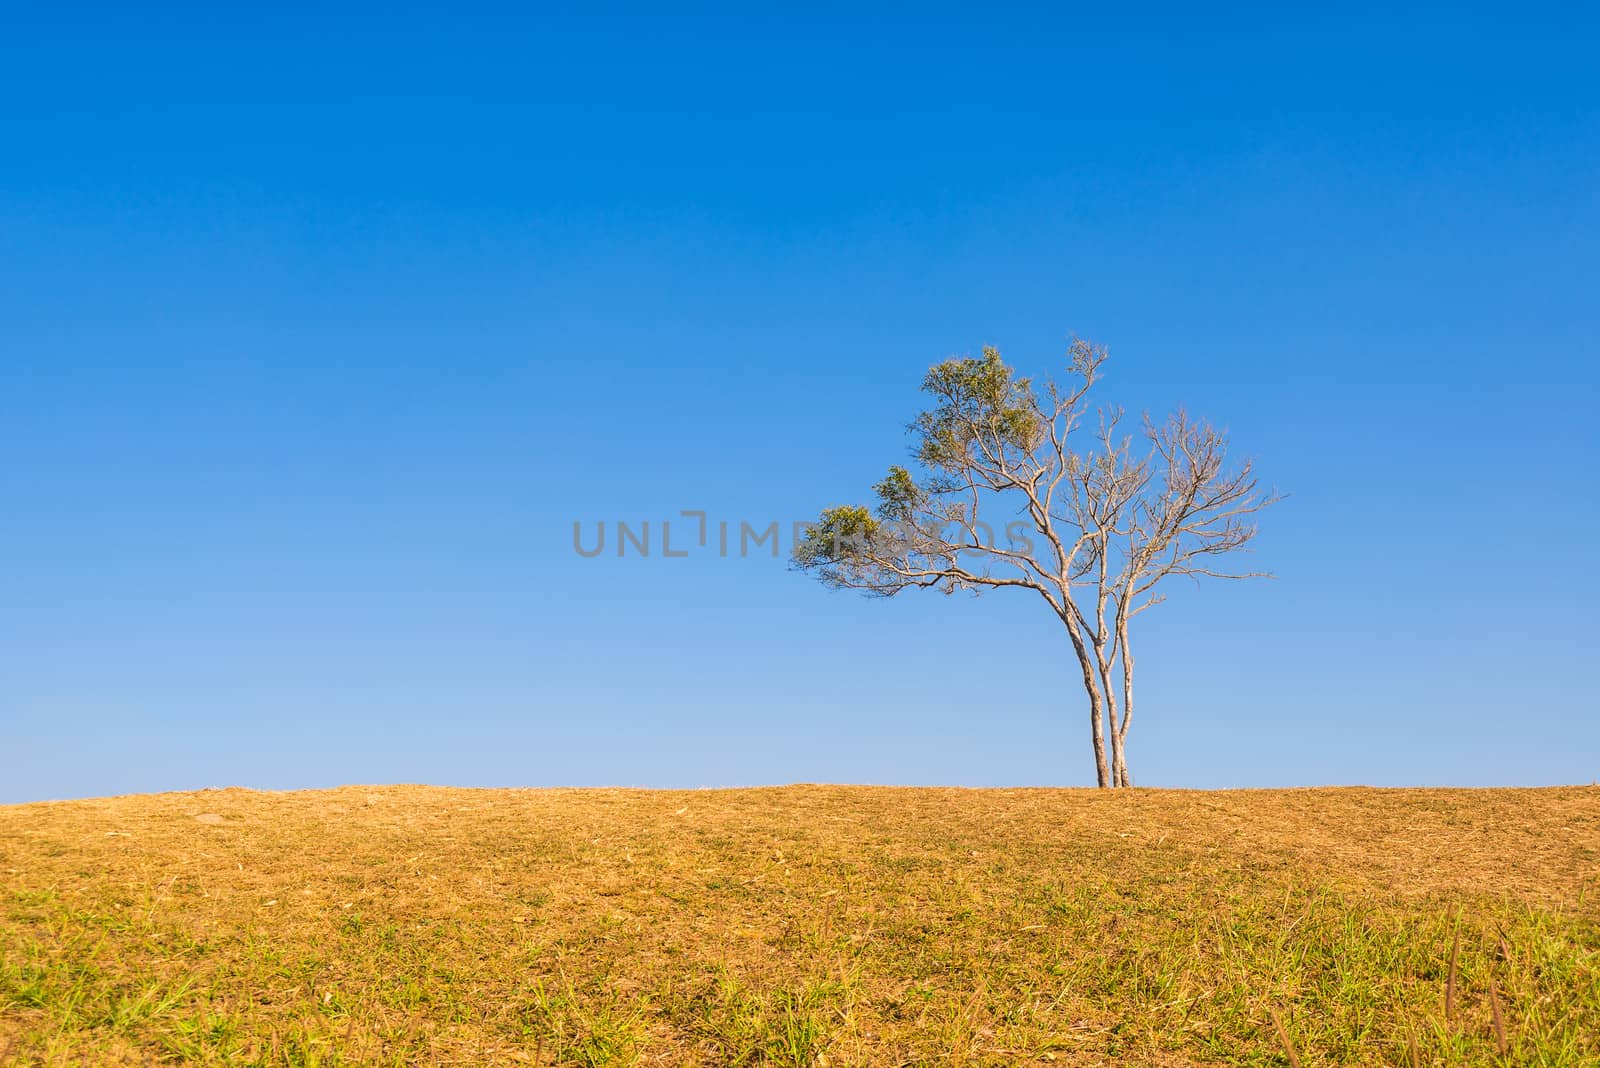 tree on hill and grass field with blue sky in background